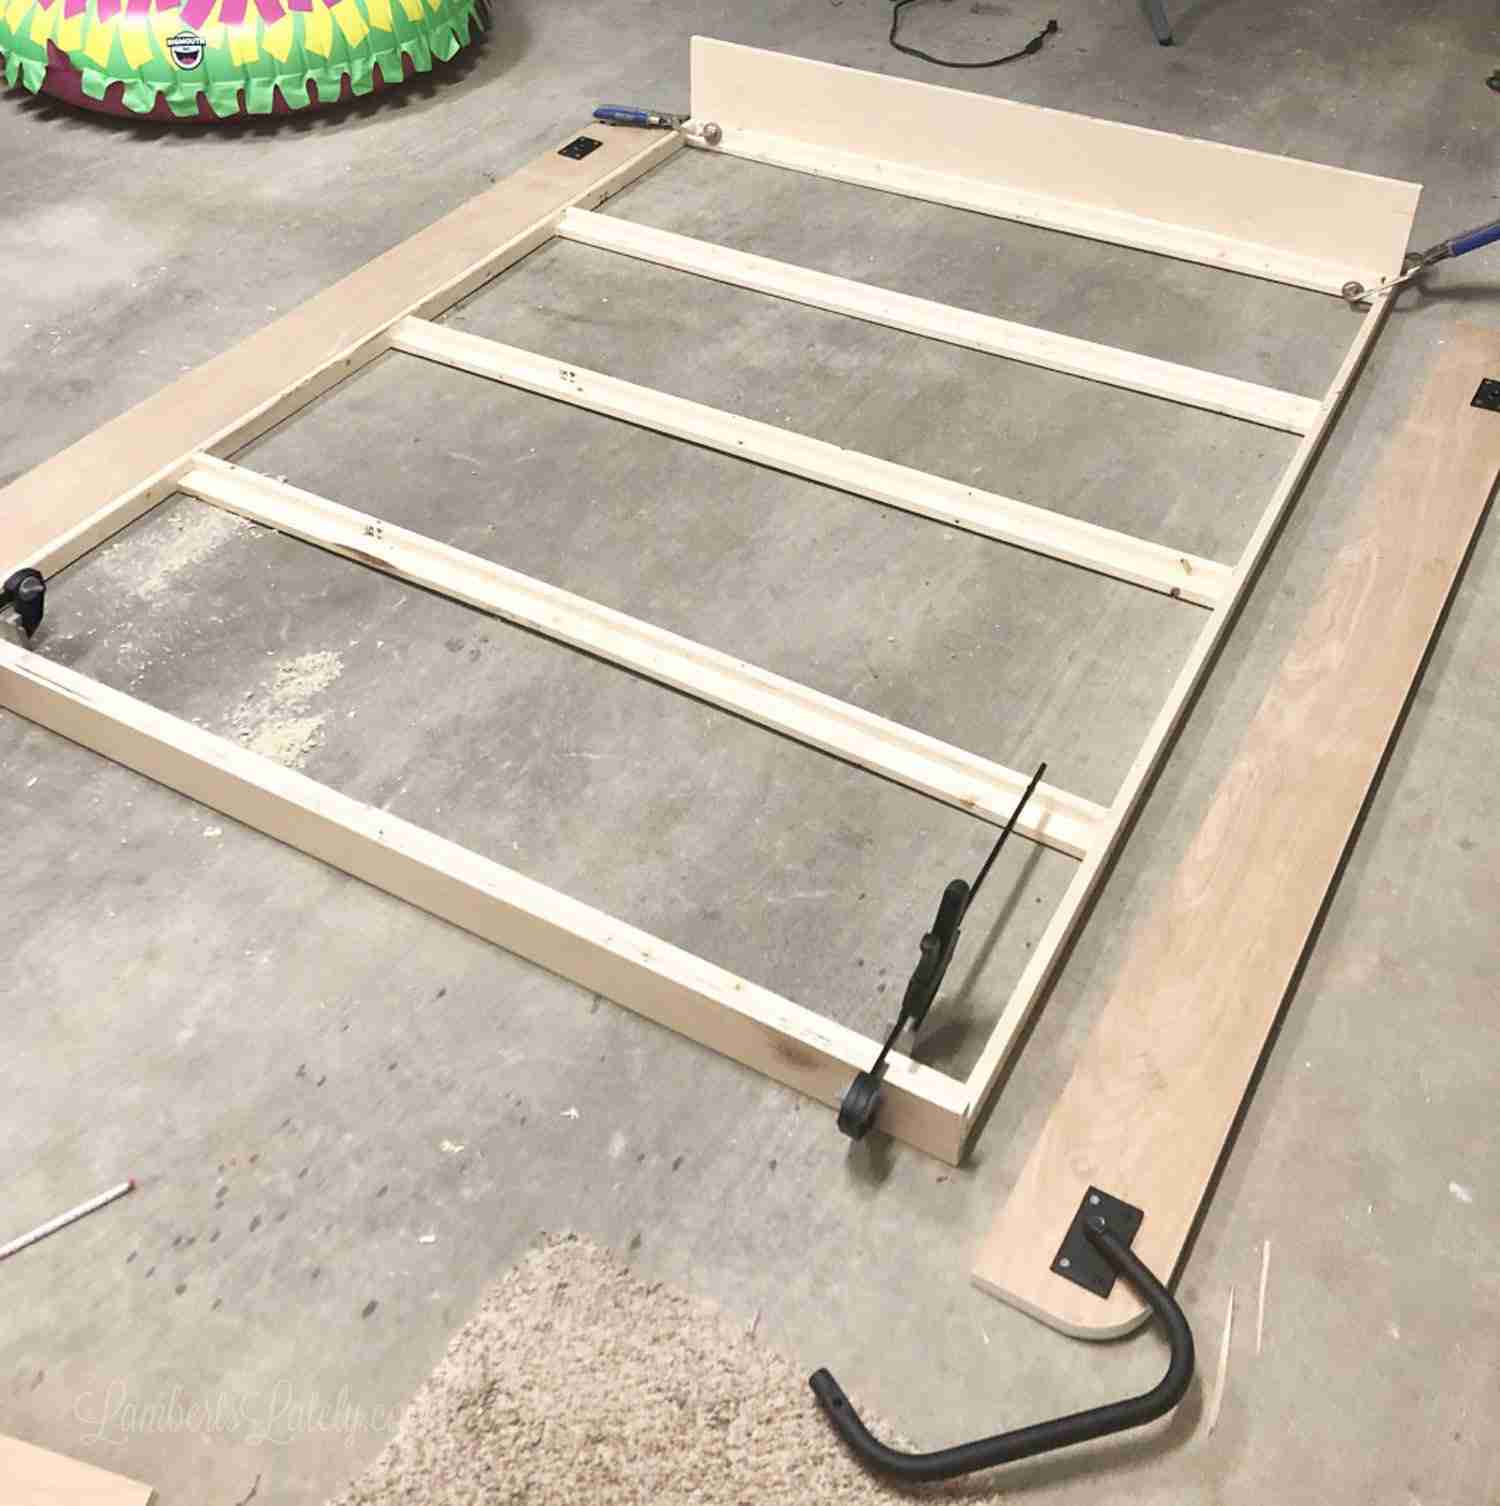 frame of murphy bed before adding sides.